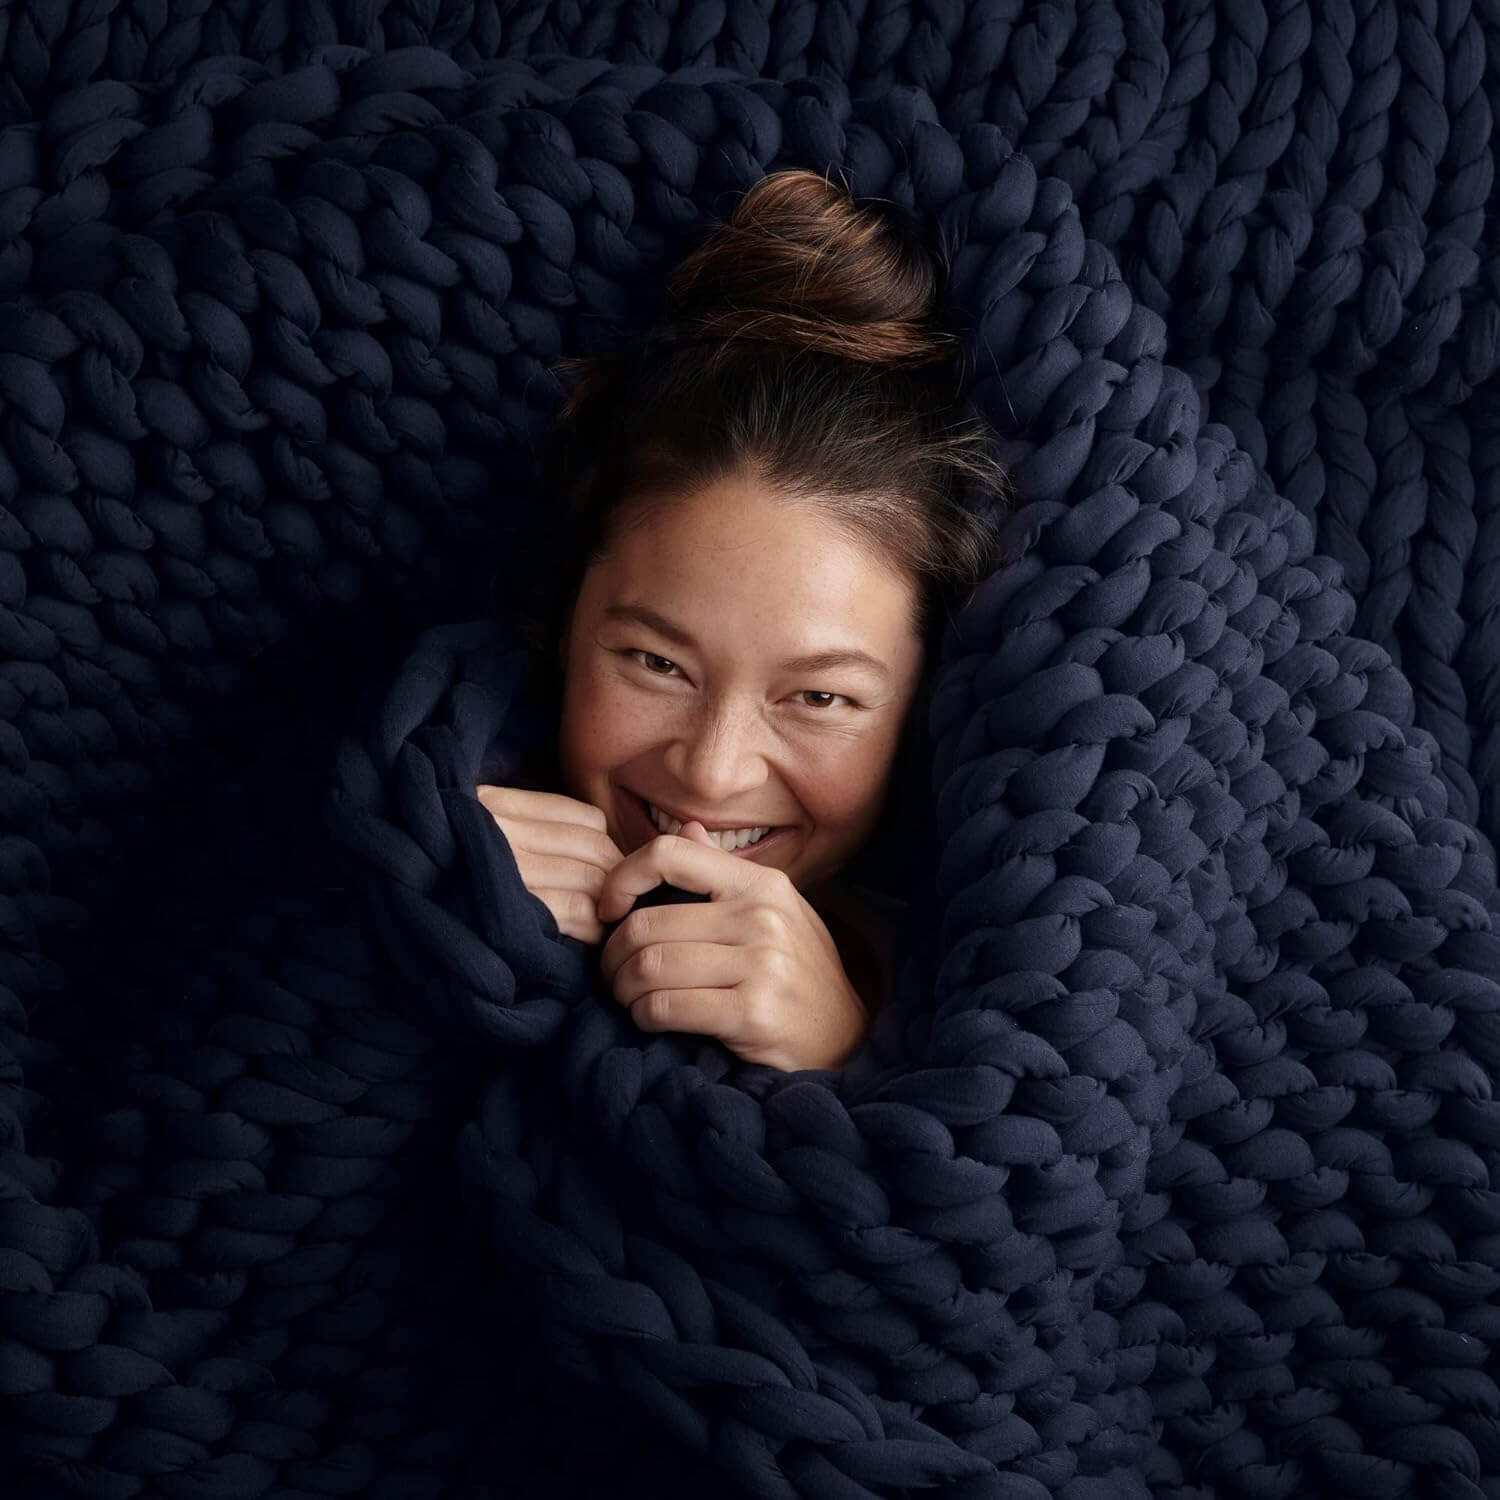 Bearaby Hand-Knit Weighted Blanket for Adults - Chunky Knit Blanket